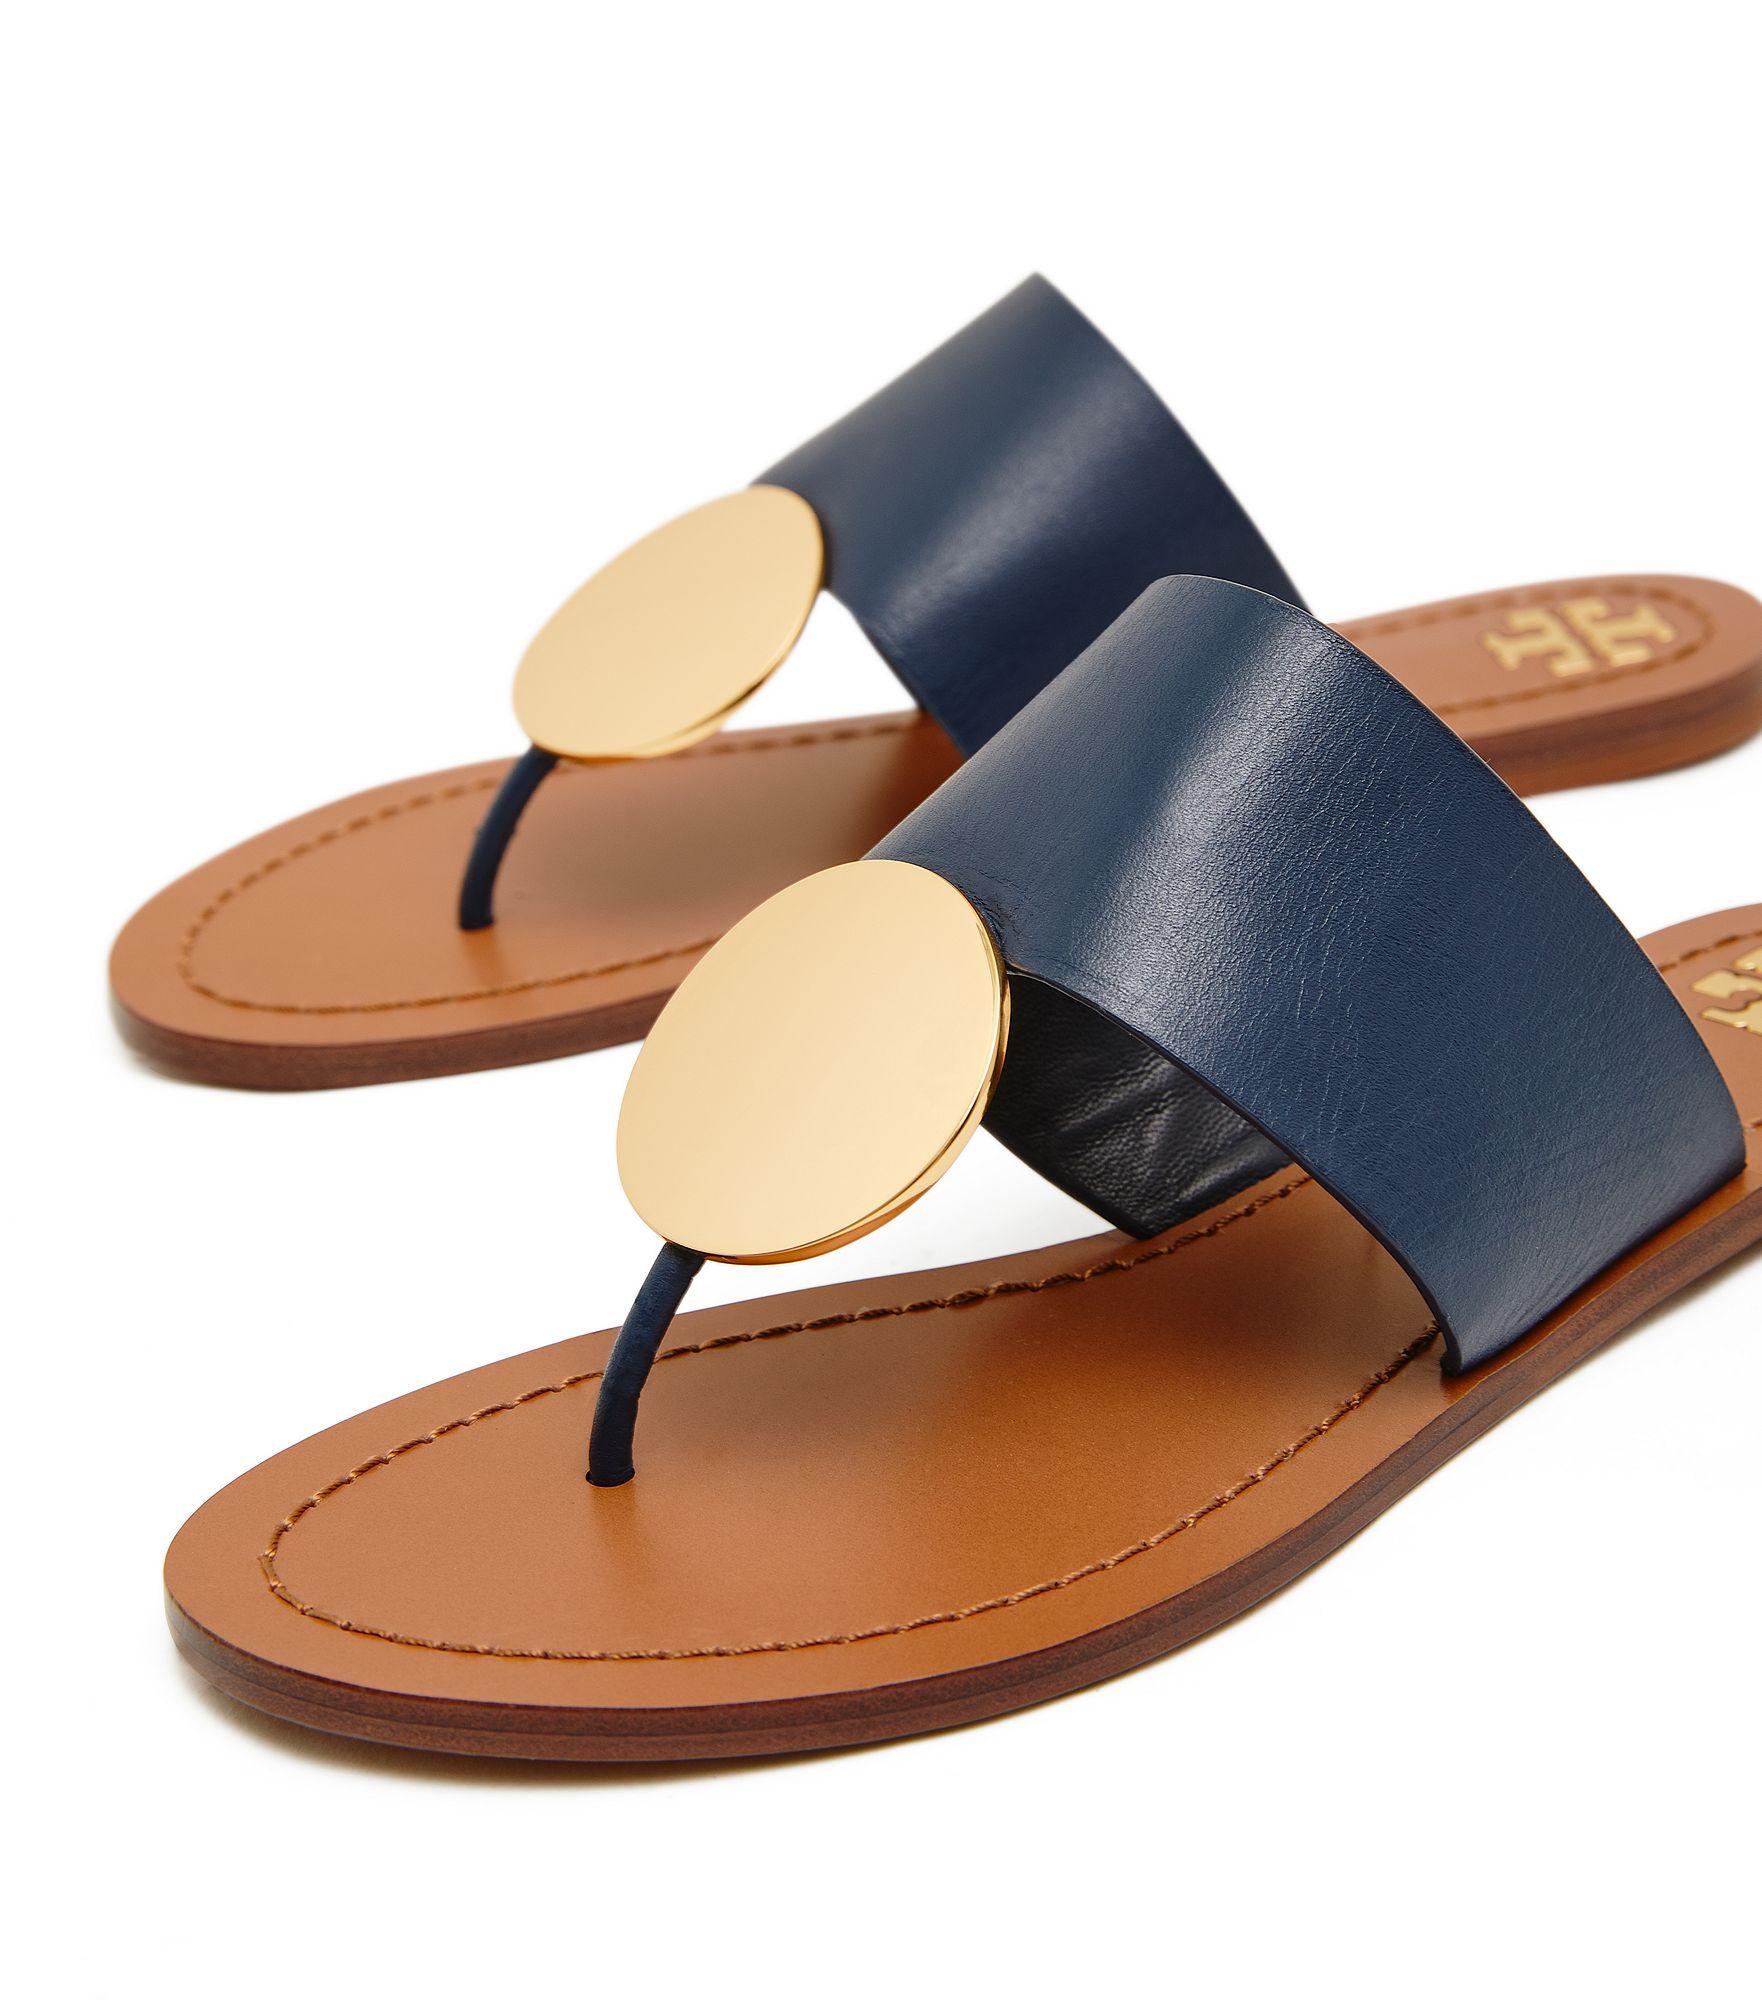 Tory Burch Patos Disk Sandals in Blue | Lyst Canada